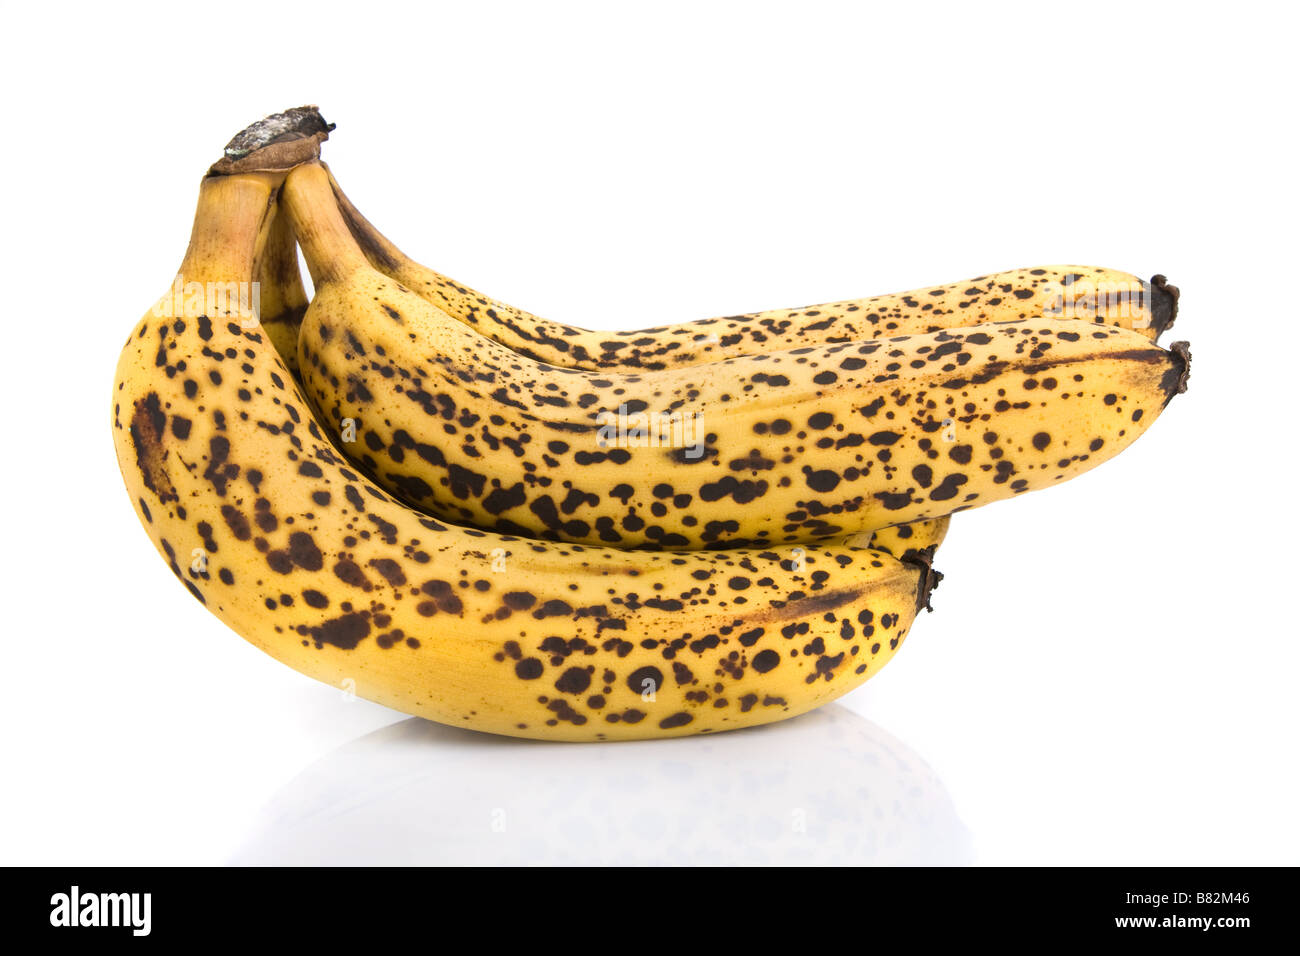 https://c8.alamy.com/comp/B82M46/cluster-of-over-ripe-bananas-isolated-on-white-background-B82M46.jpg